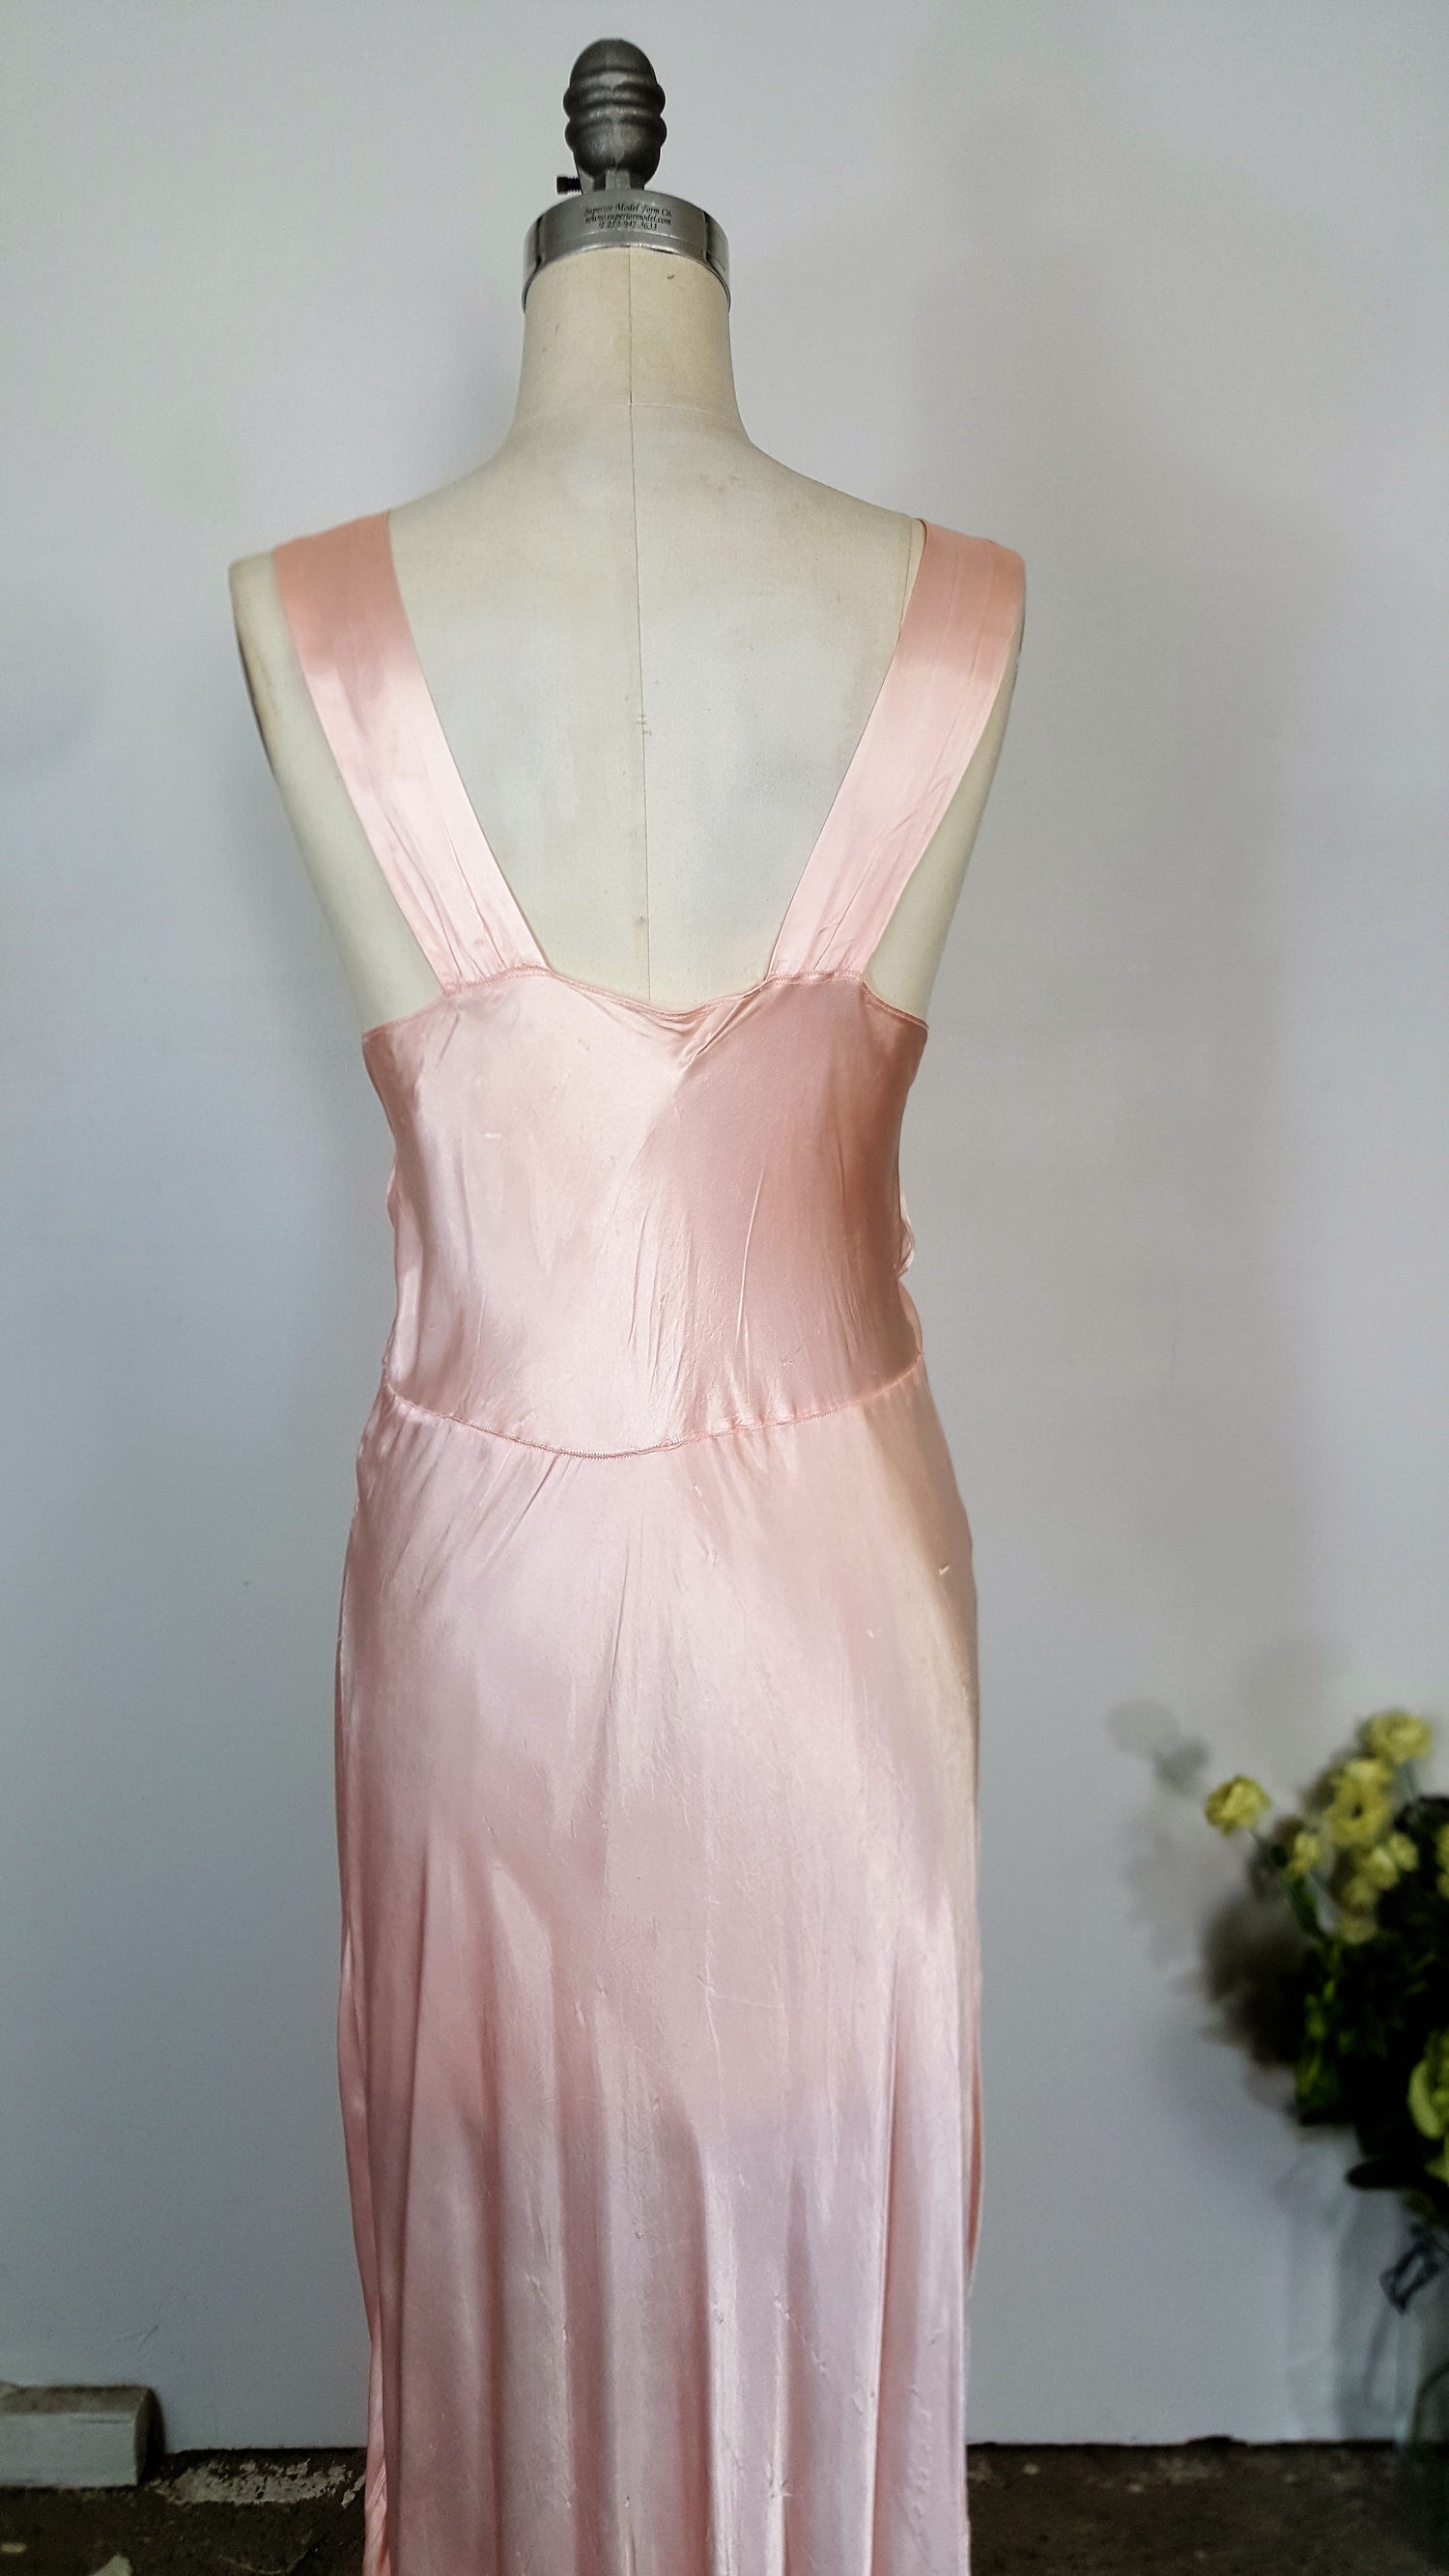 Vintage 1940s 1950s Pink Satin Nightgown With Ivory Lace Trim